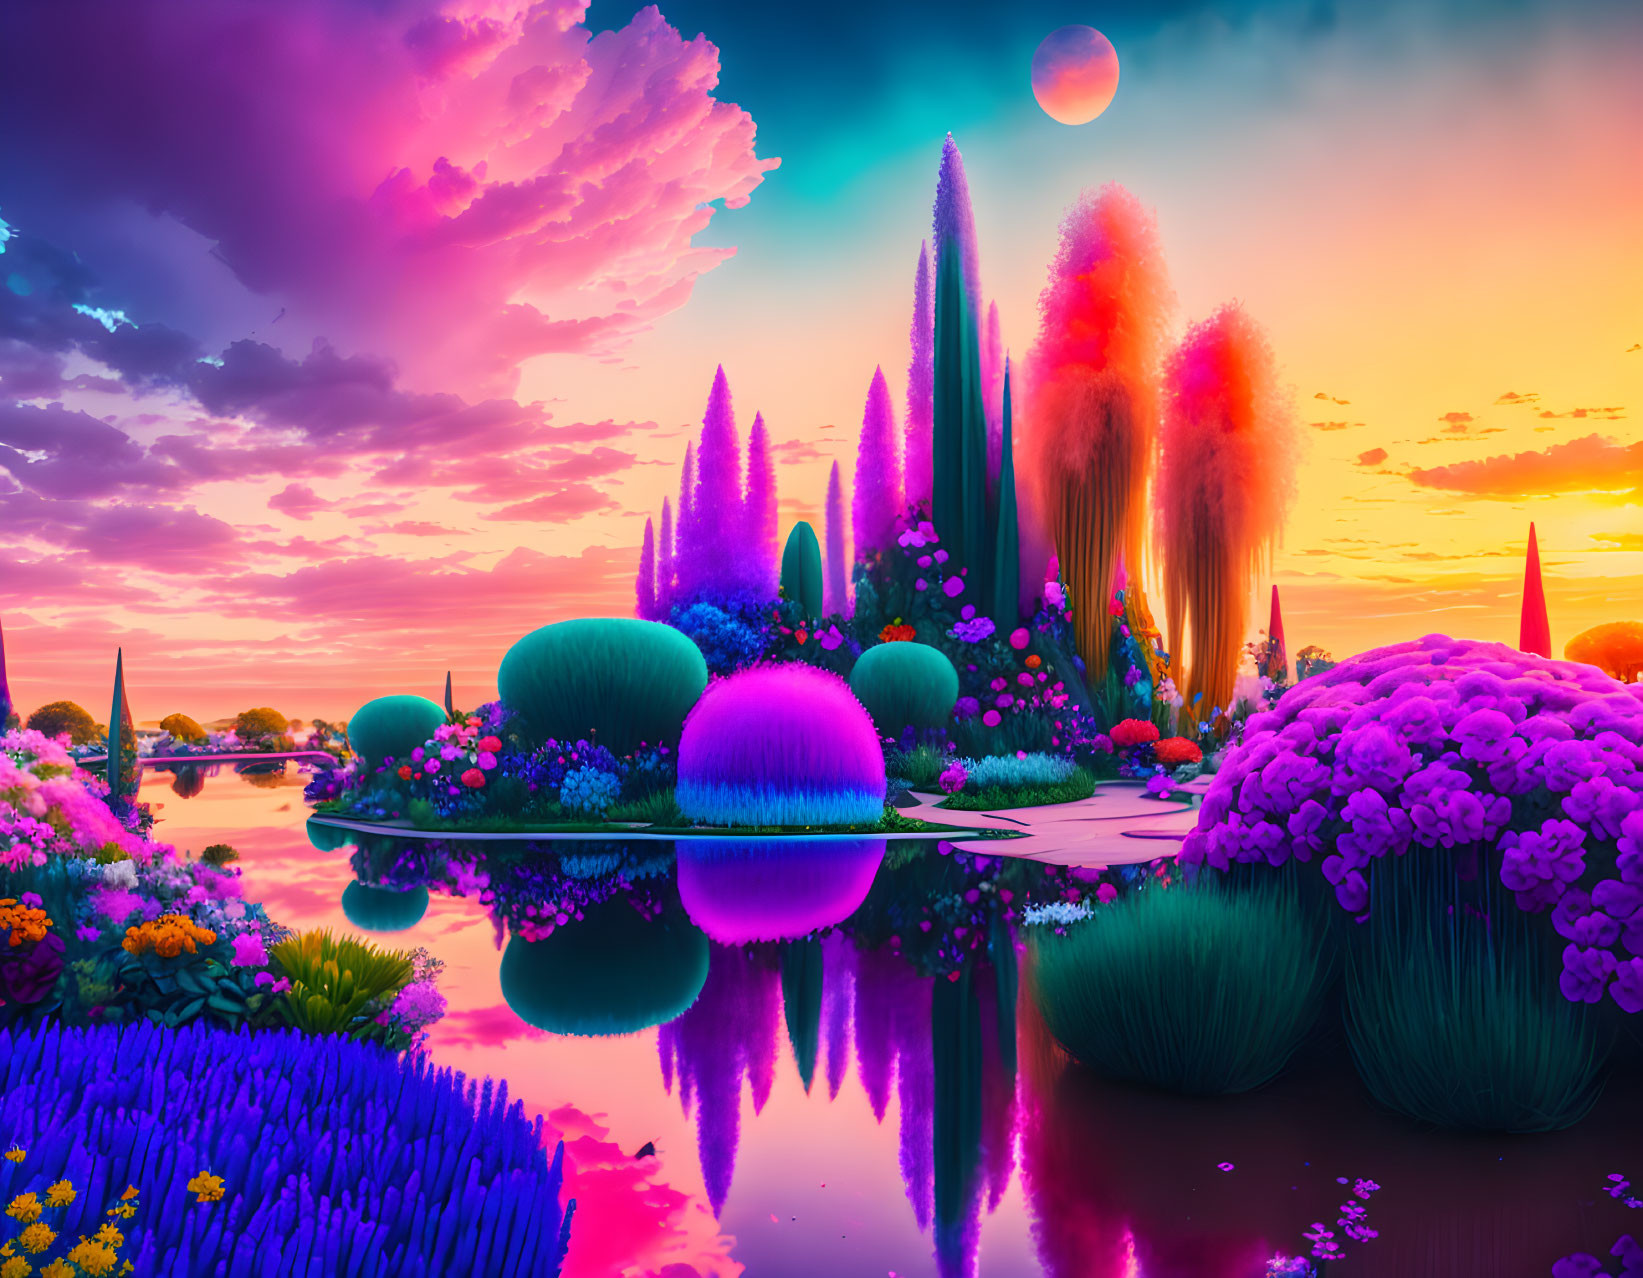 Colorful Otherworldly Landscape with Serene Water Reflections